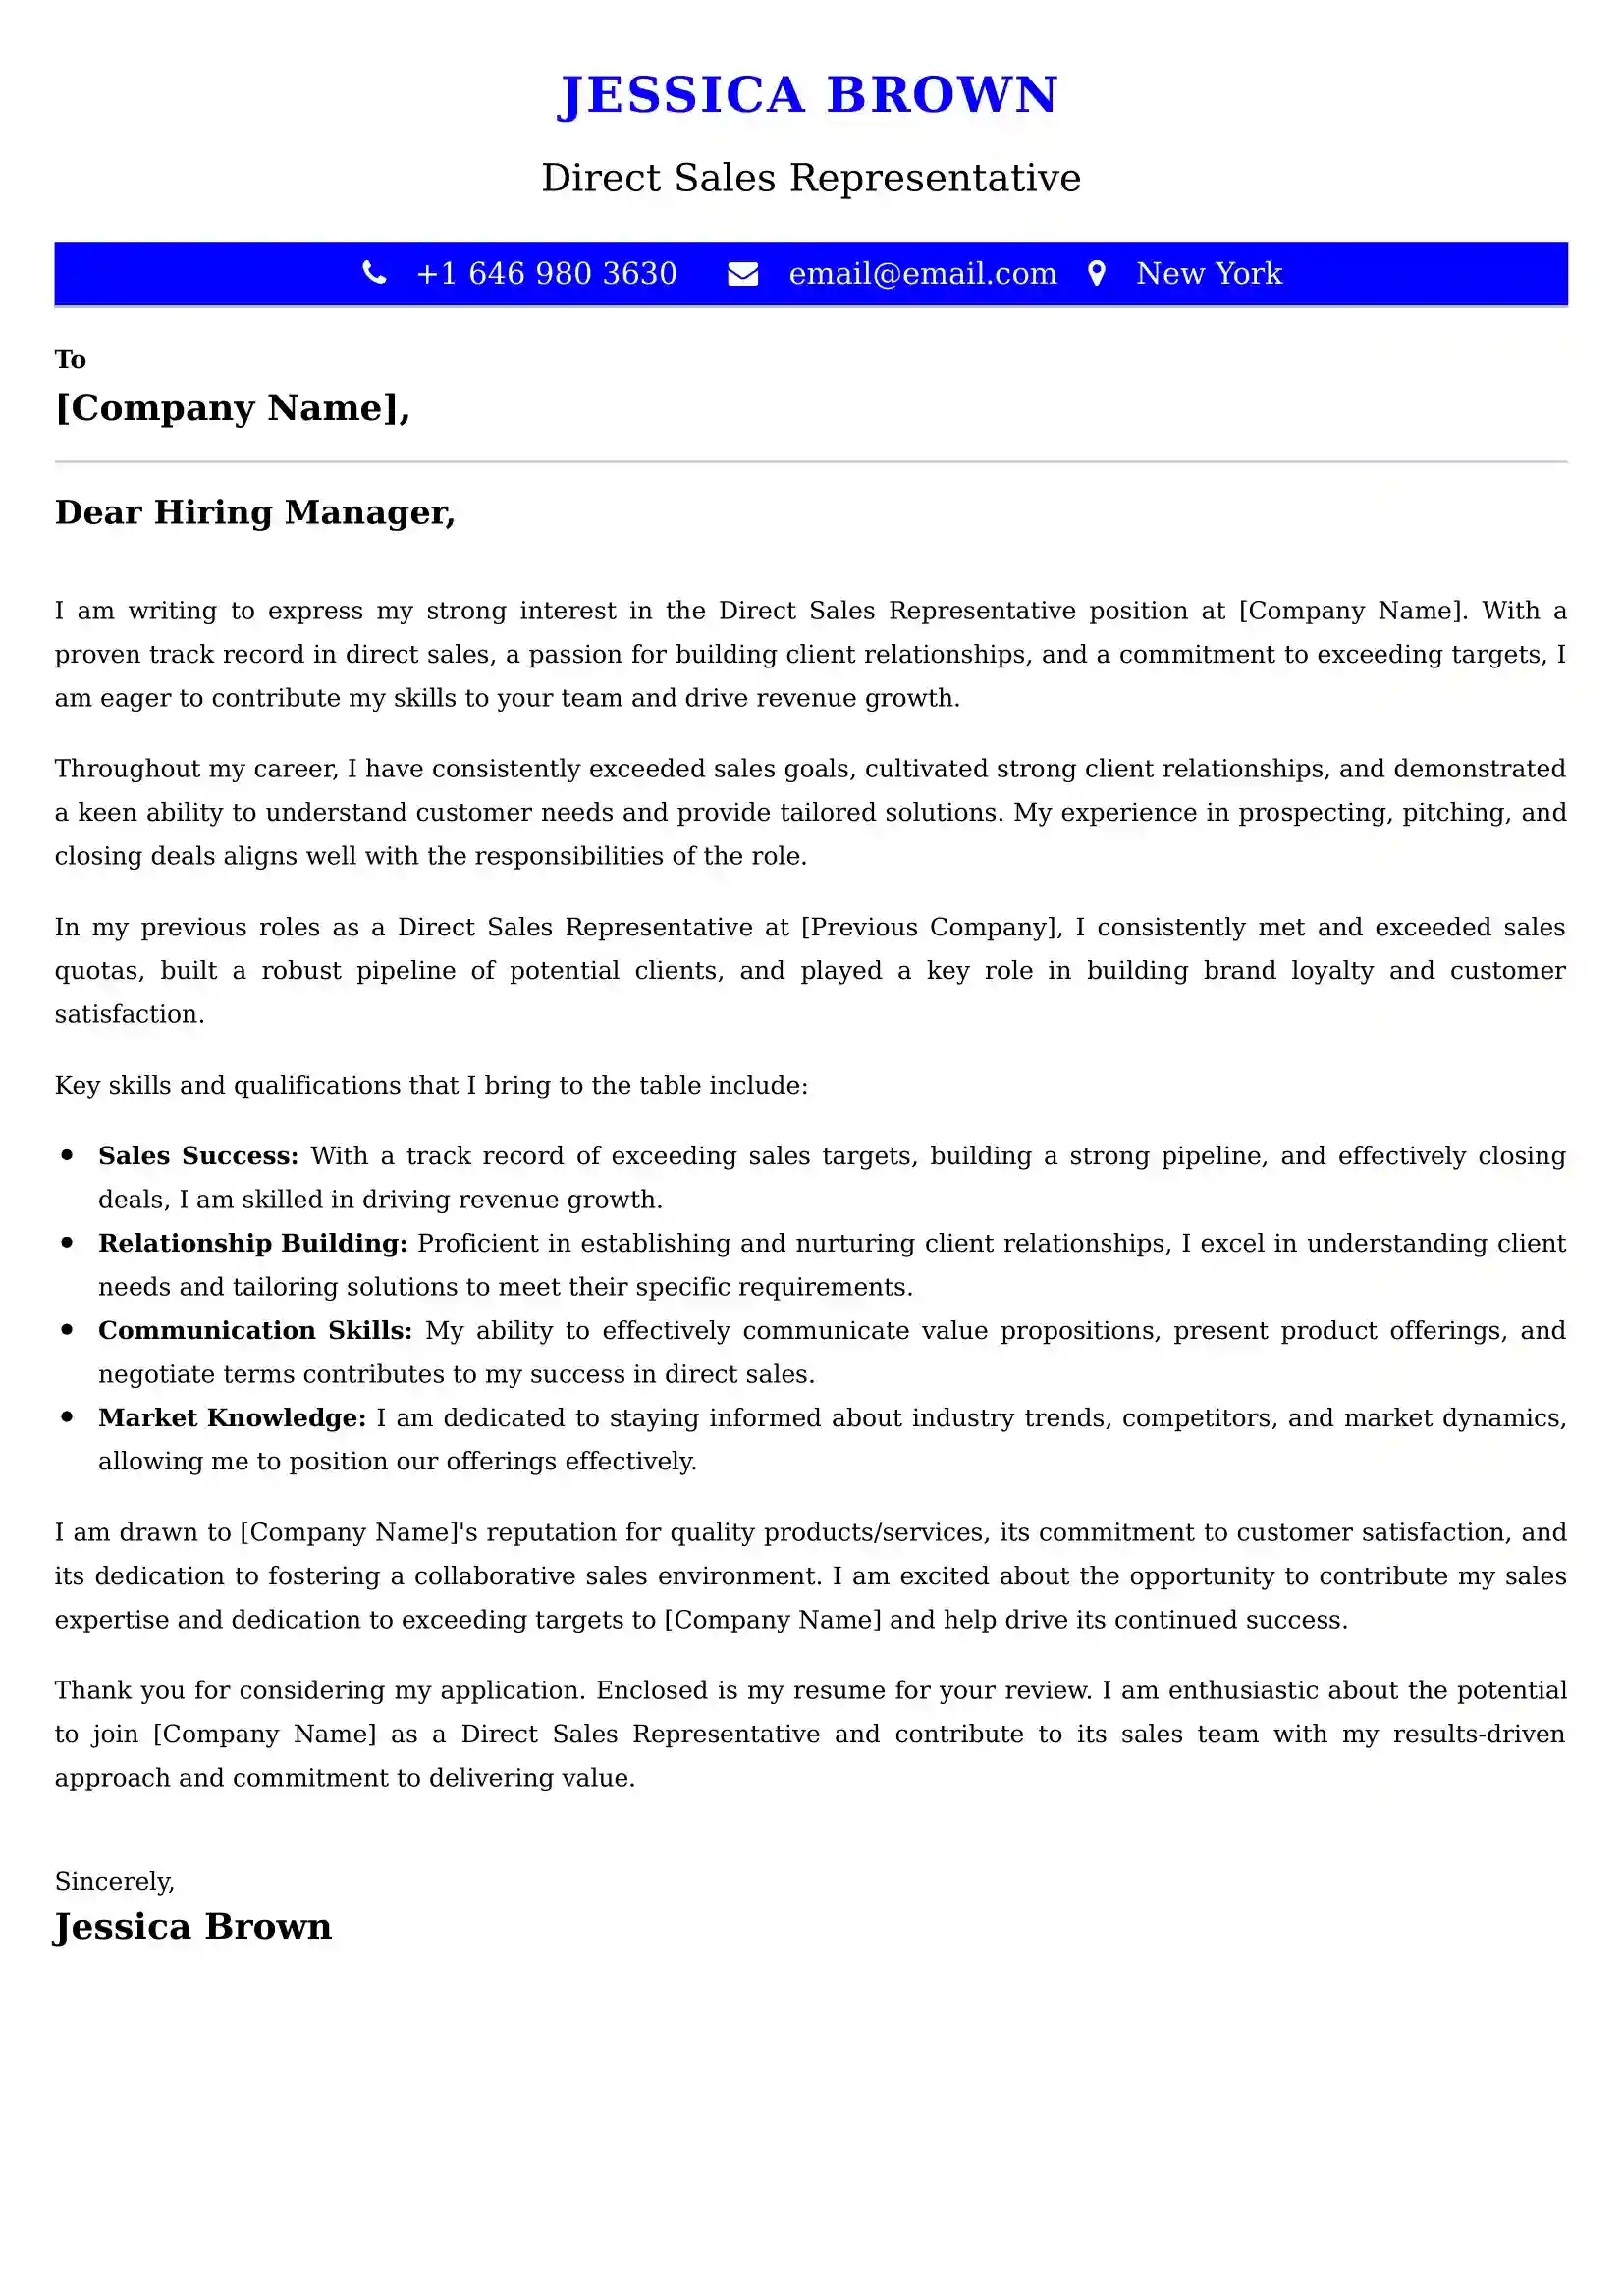 Direct Sales Representative Cover Letter Examples for UK 